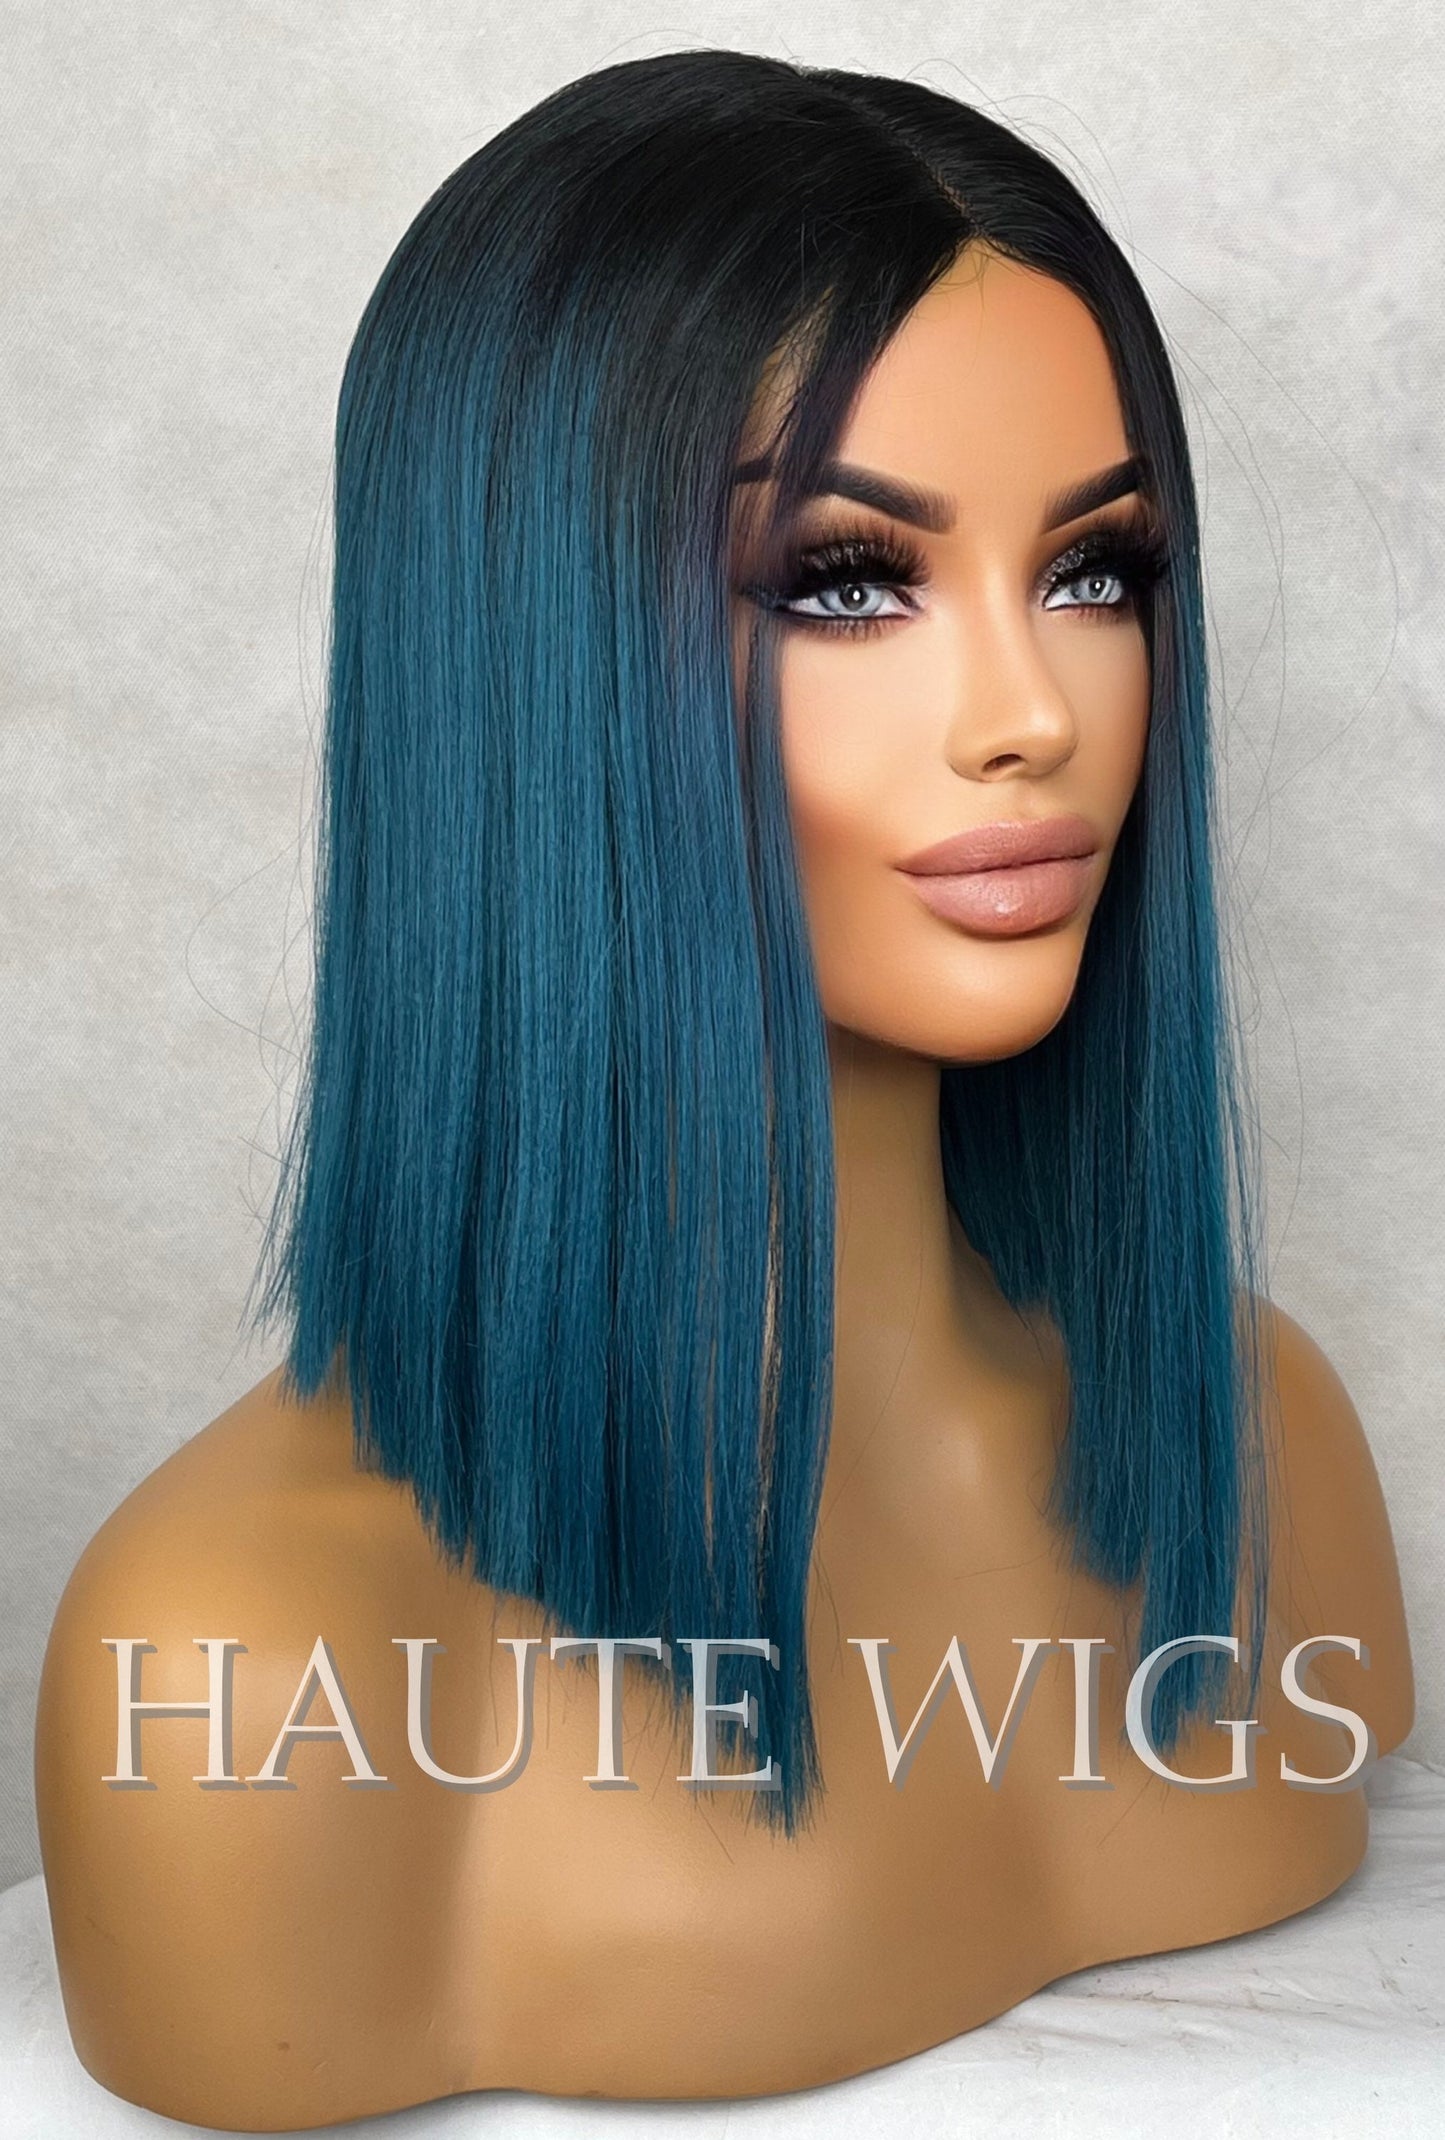 Slanted Ombré Turquoise Teal Dark Sea Aqua Blue Green Wig Center Part Short Straight NO Lace Front Human Hair Blends Wig Dark Roots Ladies